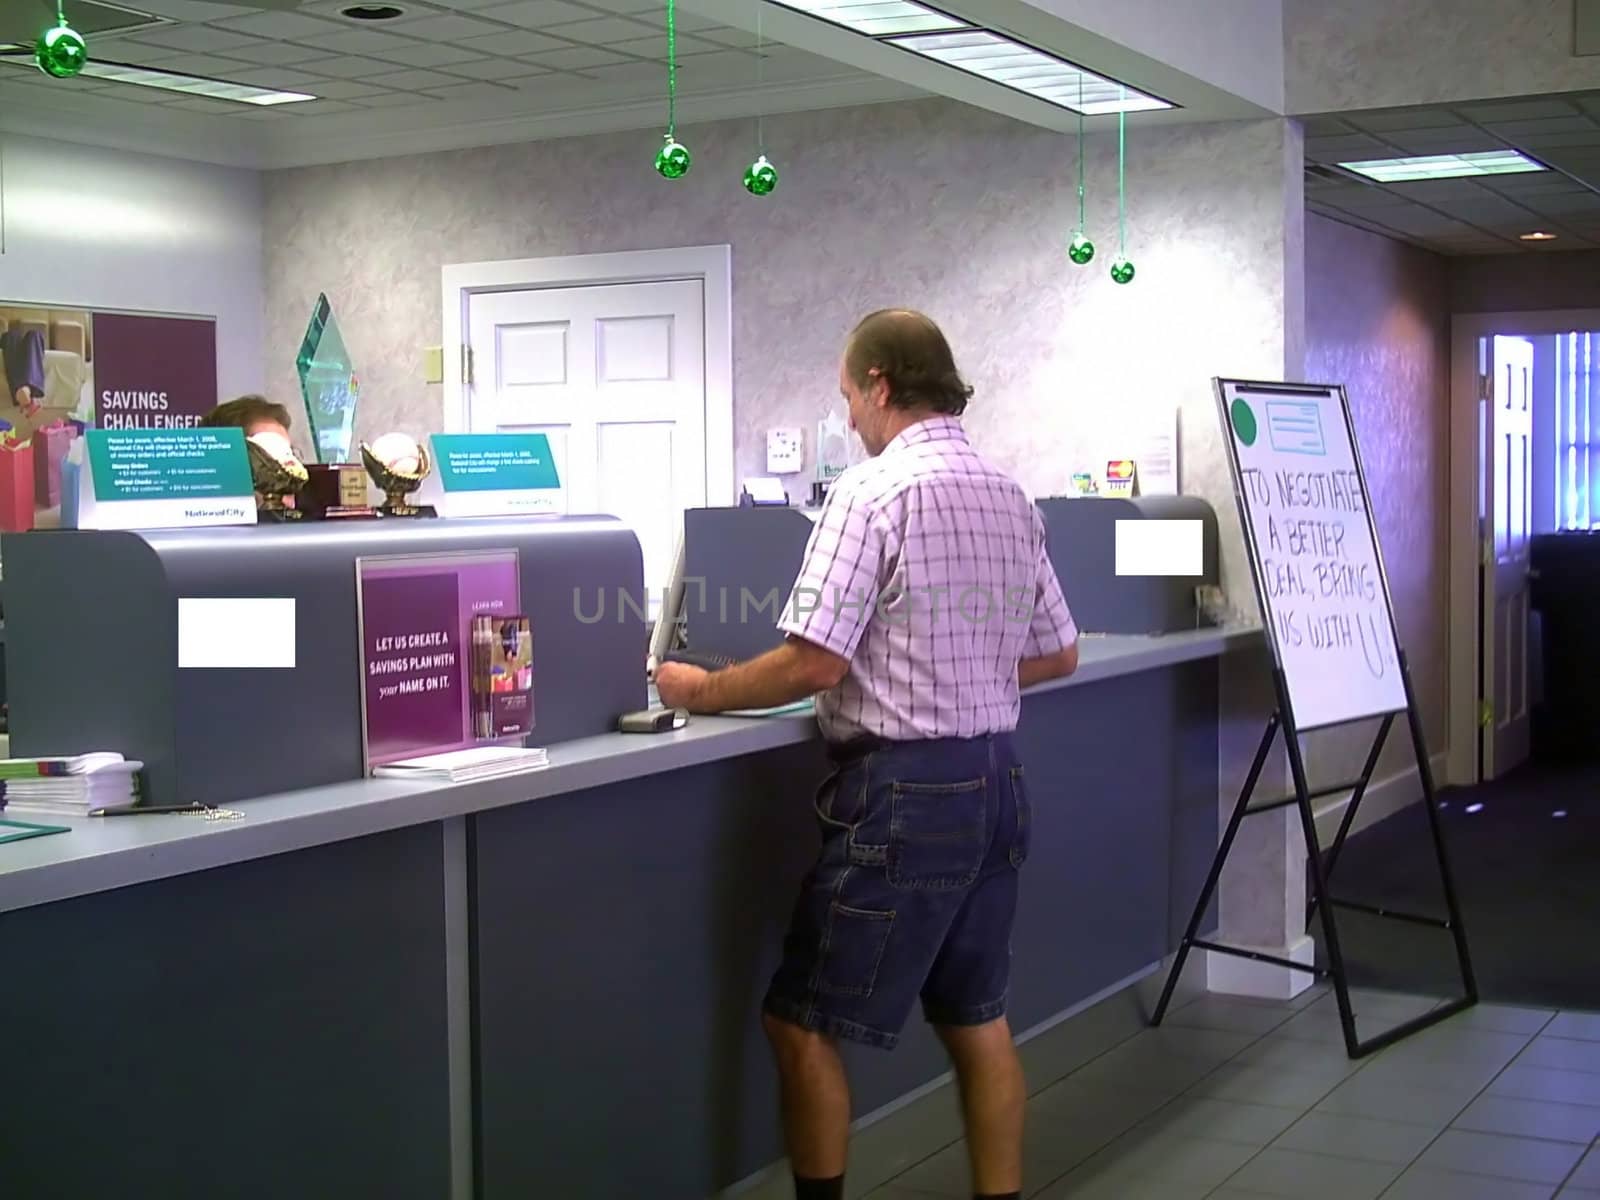 A man is inside a bank for some business, and he is talking to a teller who is standing behind the counter.